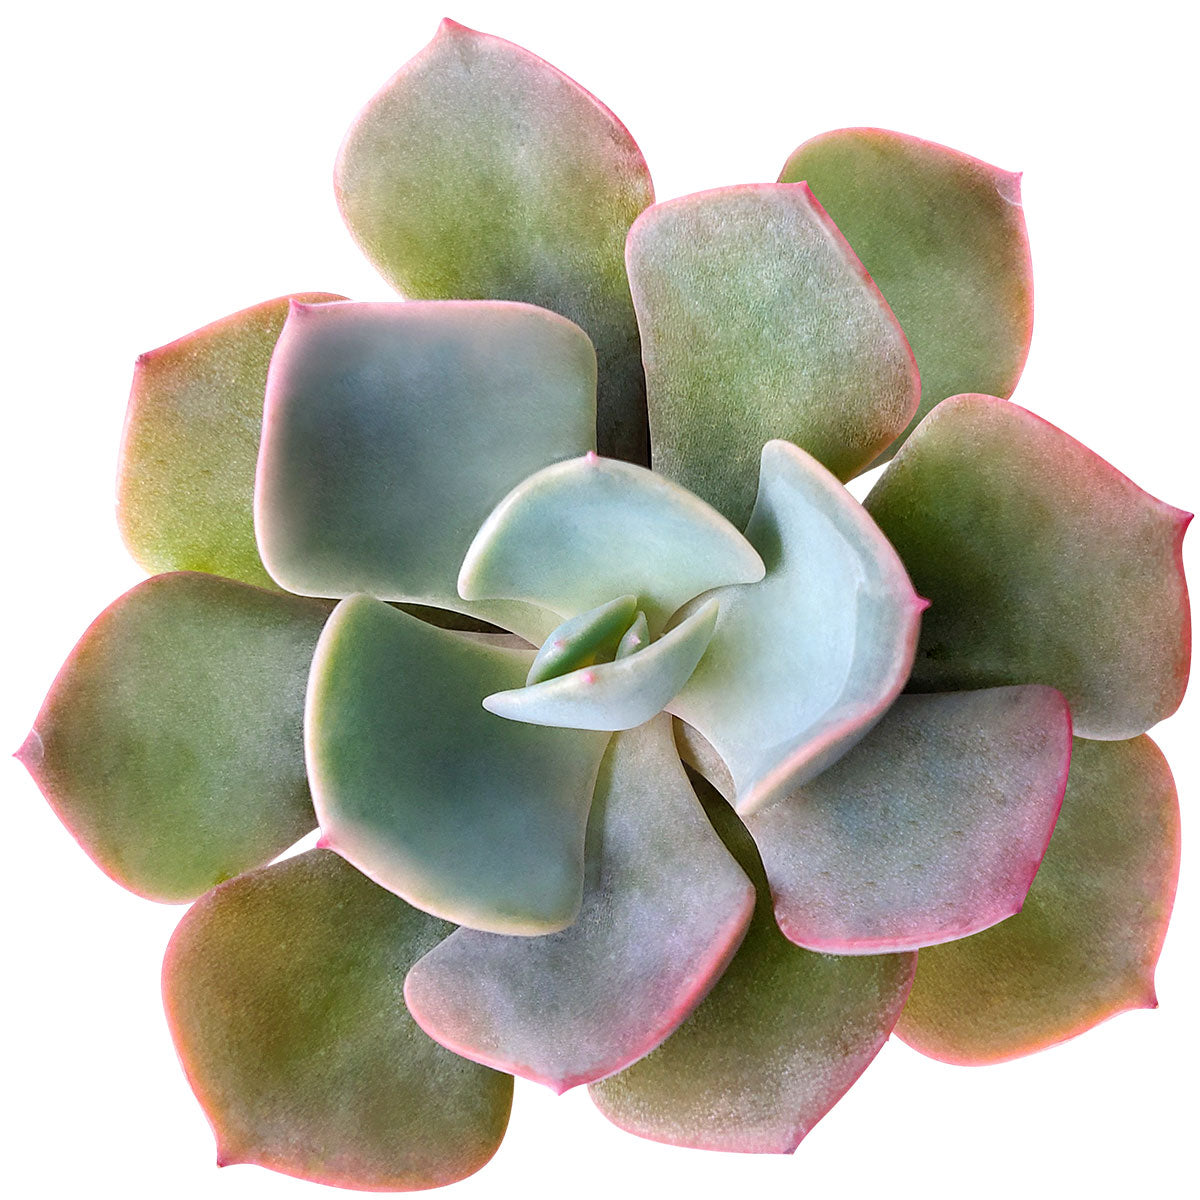 Echeveria Dusty Rose Succulent, Rosette Shaped Succulent Plant, How to grow Echeveria Dusty Rose, Succulent Gift Box, Purple Echeveria Succulent, Shop Succulent in California, Pink Rosette Succulent for Sale, Succulents, Christmas Gift Box, Succulents for thanksgiving gift, Easter succulents idea, Growing succulents for thanksgiving, echeveria, echeveria succulent, echeveria types, succulent echeveria, buy succulents online, succulent shop, succulent store, echeveria plant, indoor succulents